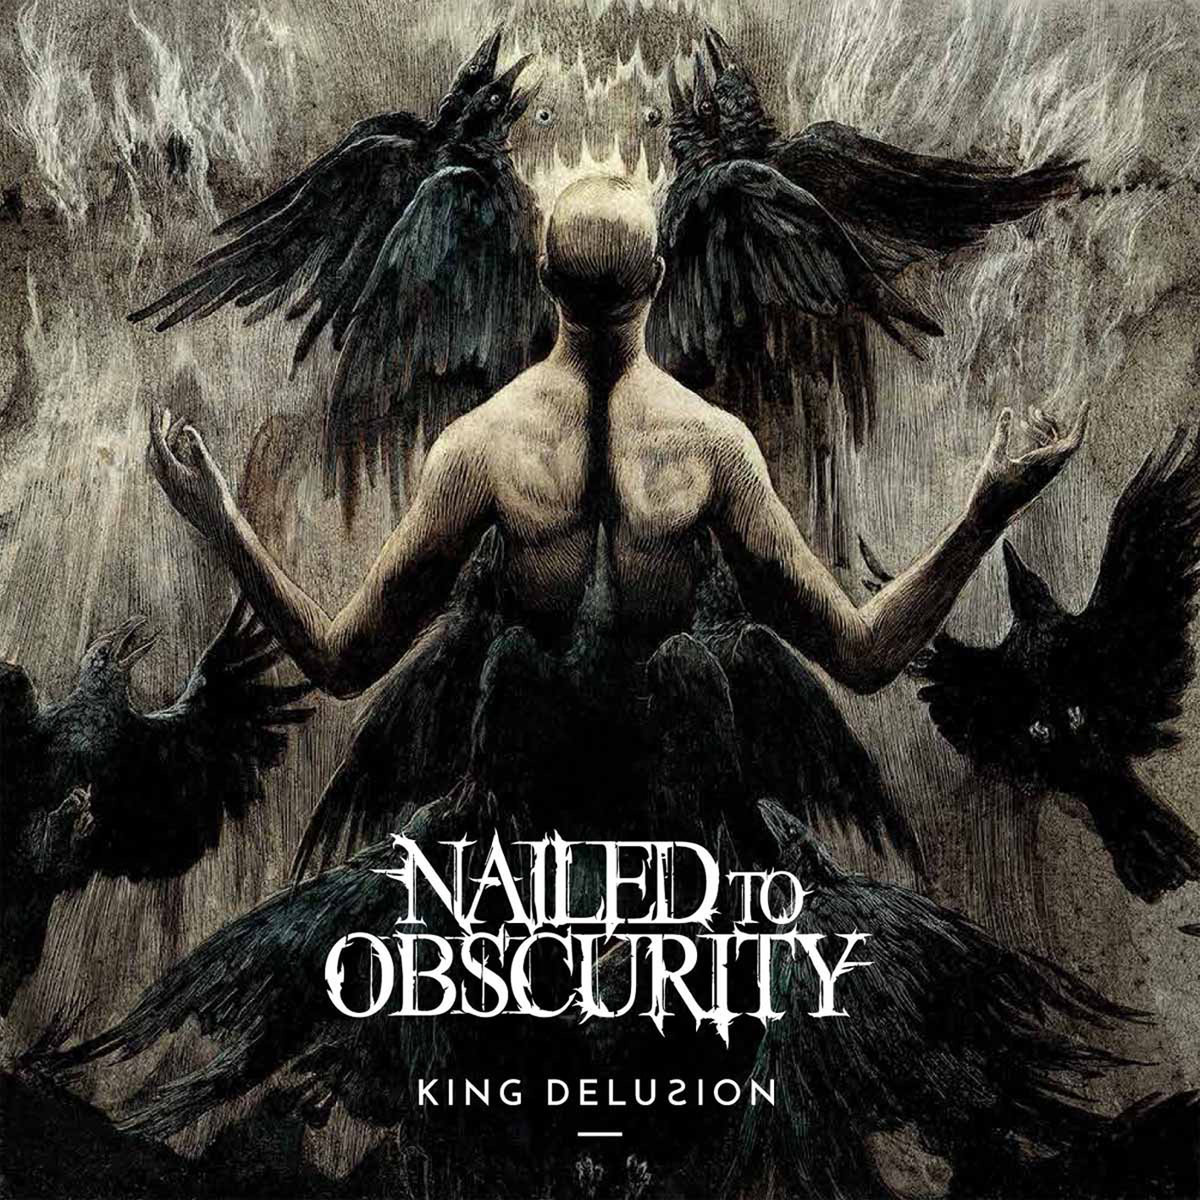 Nailed to Obscurity: King Delusion